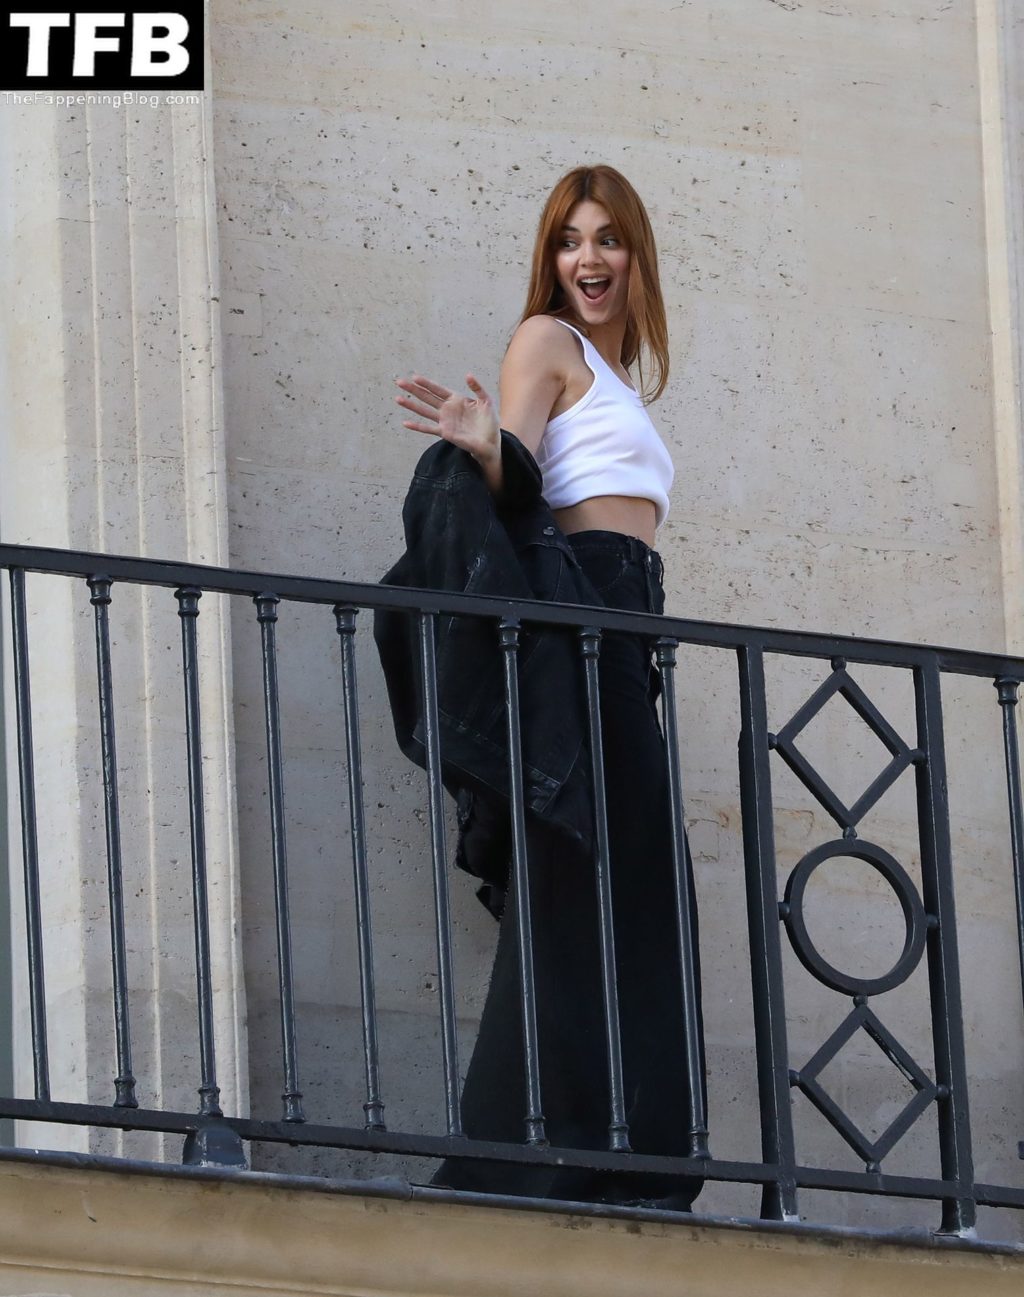 Kendall Jenner Braless The Fappening Blog 84 1024x1297 - Braless Kendall Jenner Poses in Paris (141 Photos)